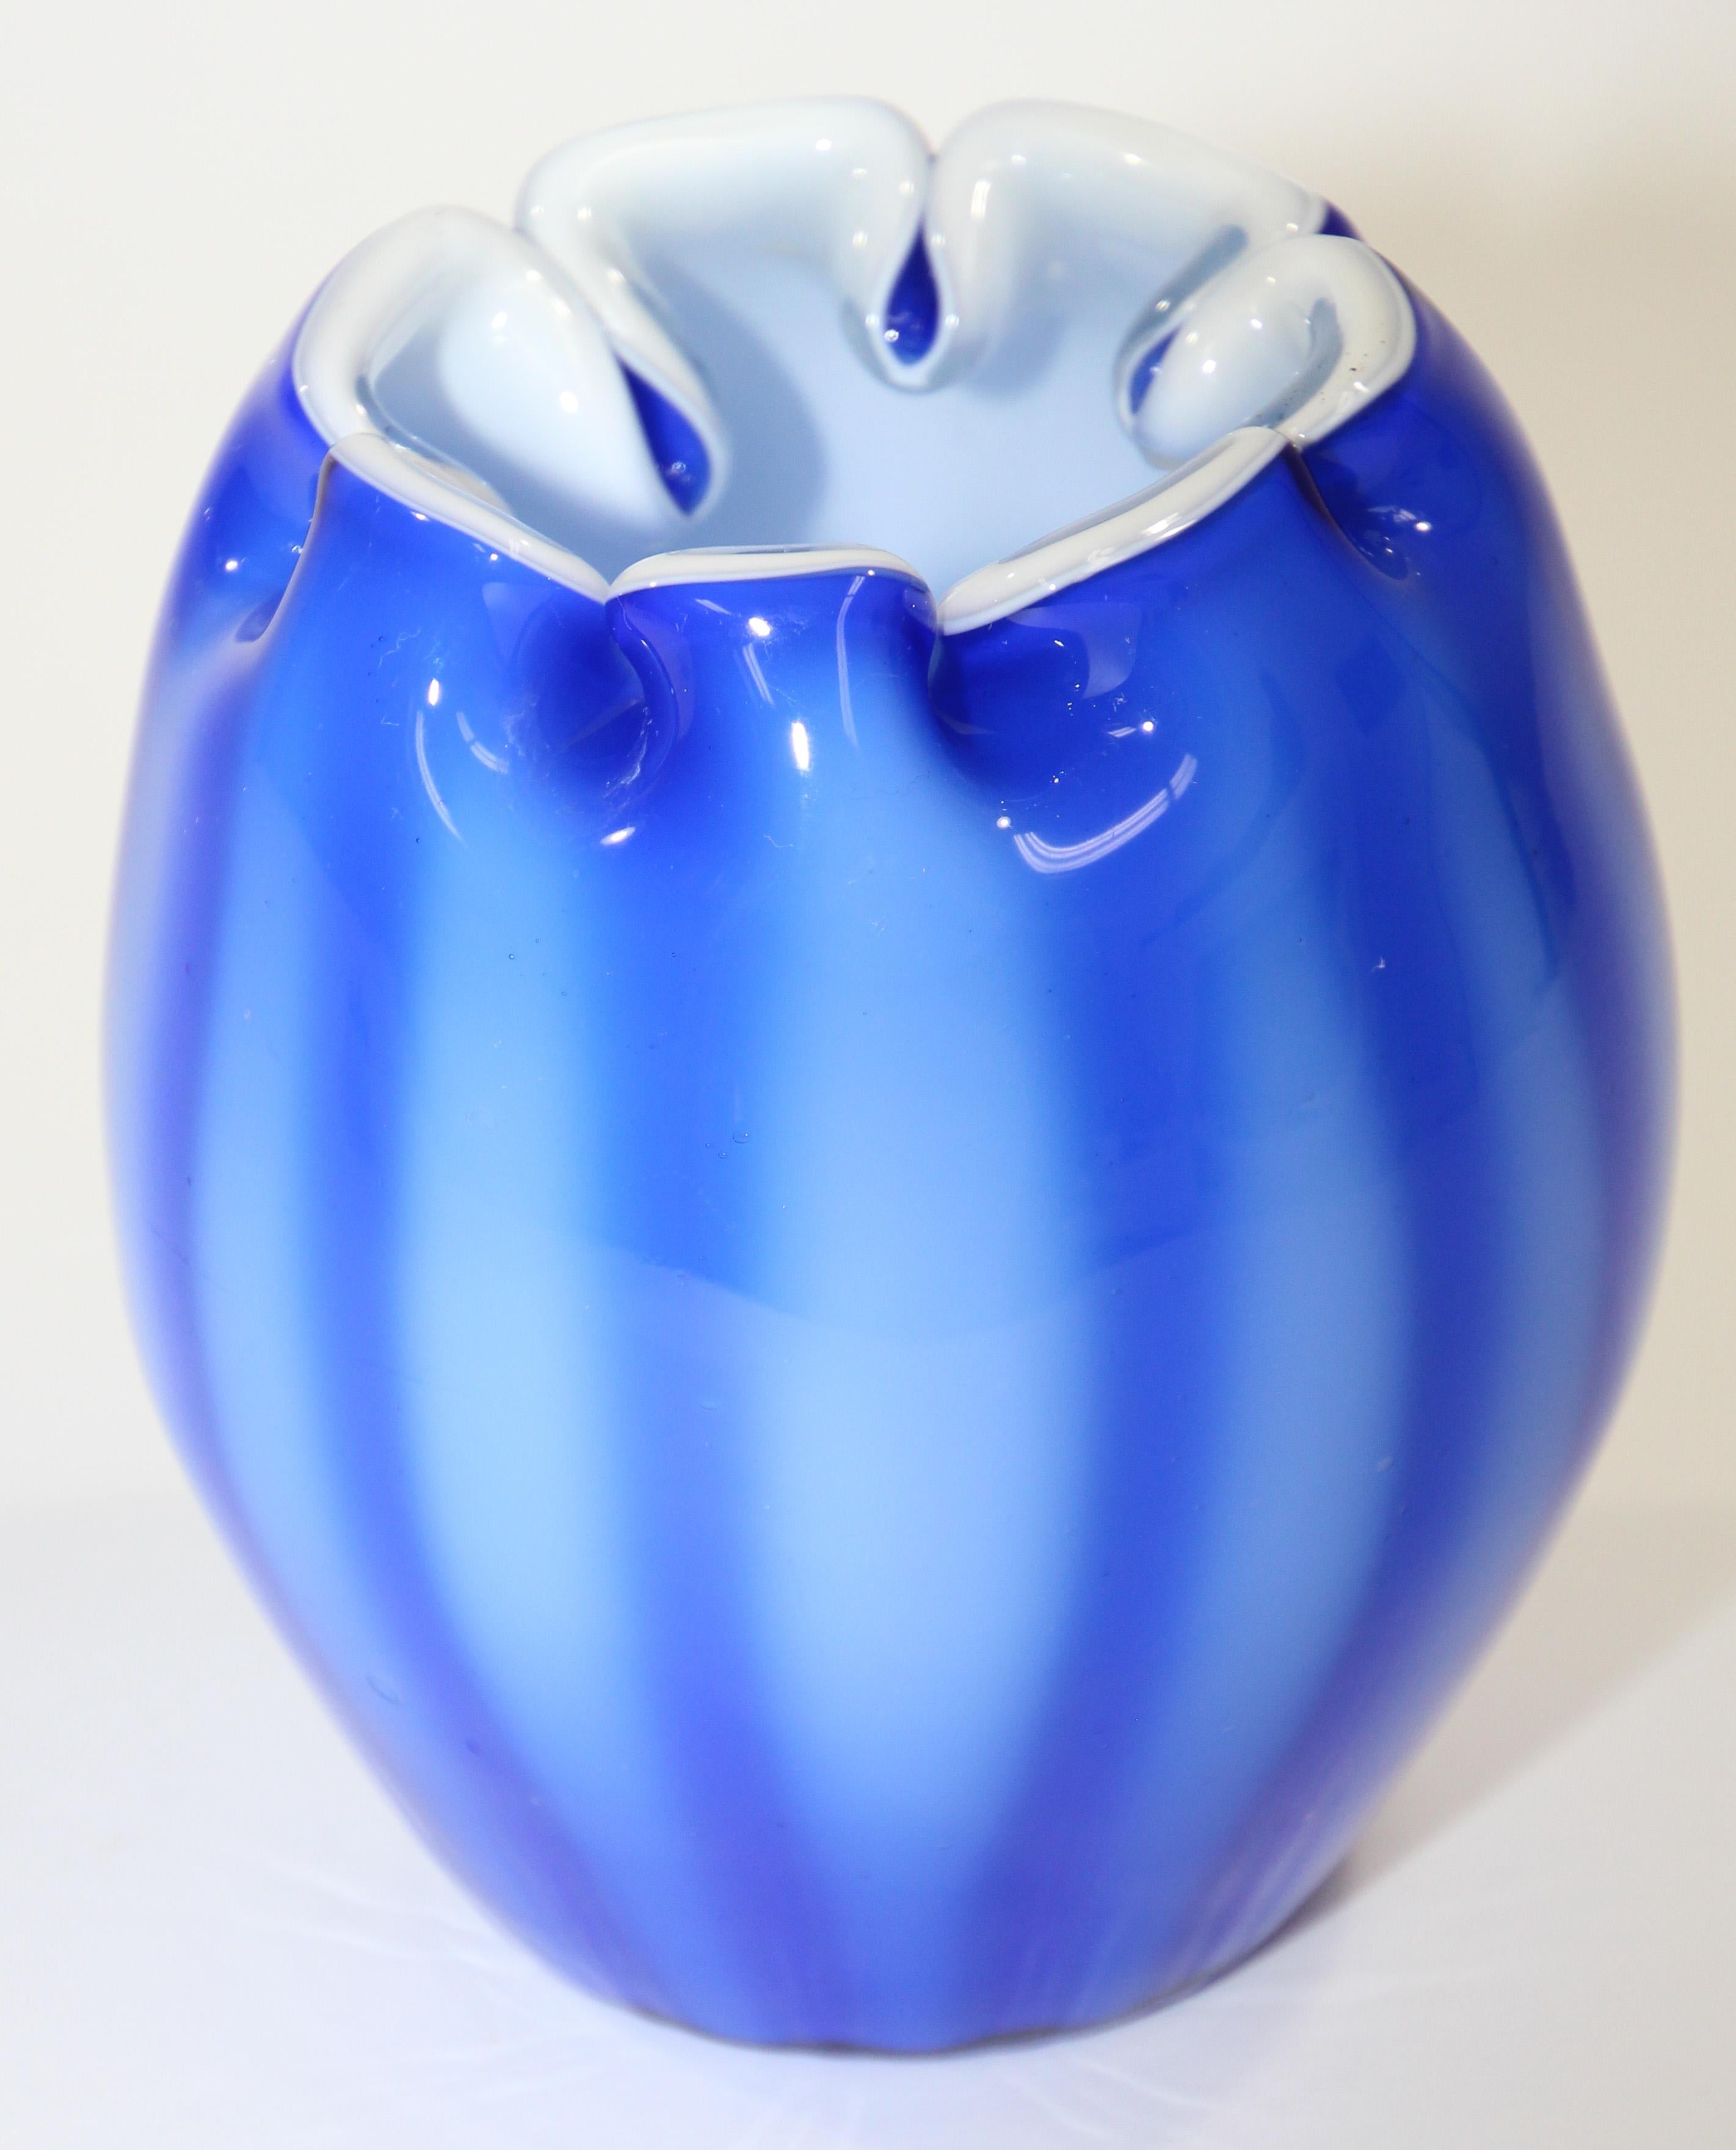 Hand blown Studio Art glass vase in cobalt blue with white feathered design.
Vintage Fenton Dave FETTY hand blown Studio Art Glass Collectible Vase.
Very nice vase vibrant cobalt blue and white pulled feather design.
Truly stunning collectible